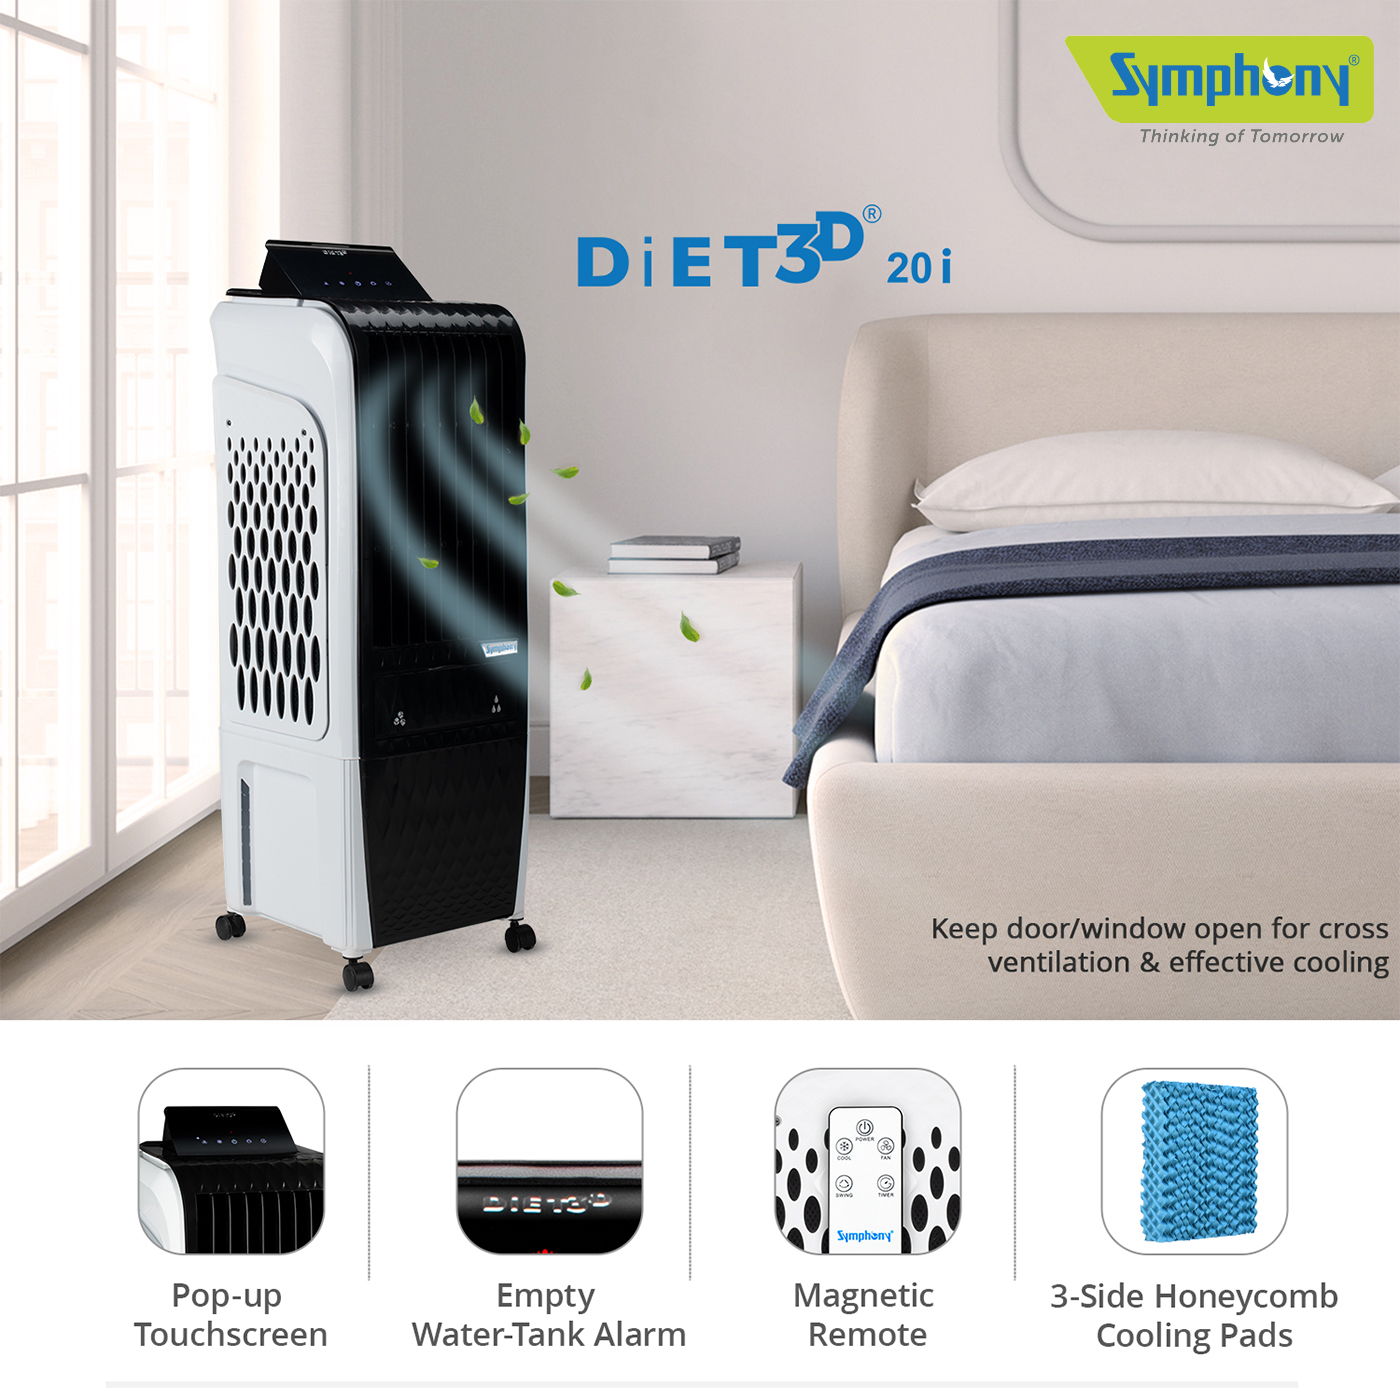 Portable Tower Personal Air Cooler Diet 3D 20i for Small Rooms